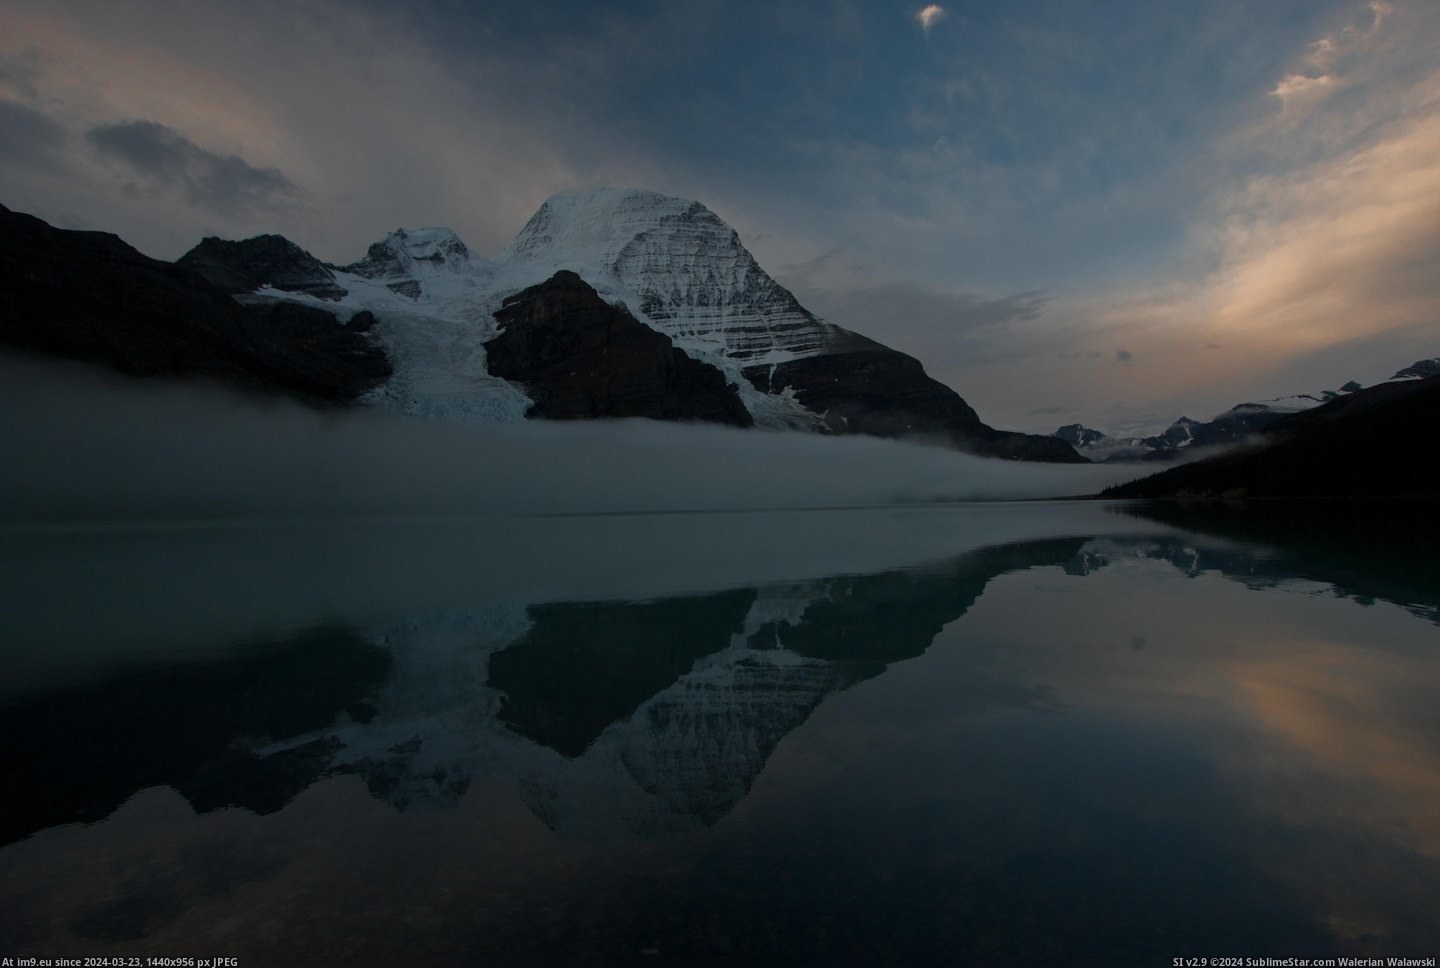 #Park #Morning #Lake #Fog #Robson #Prov #Berg #Canada #Early #Mount [Earthporn] Early morning fog, Mount Robson over Berg Lake, Mount Robson Prov Park, BC, Canada [3888 × 2592] [OC] Pic. (Изображение из альбом My r/EARTHPORN favs))